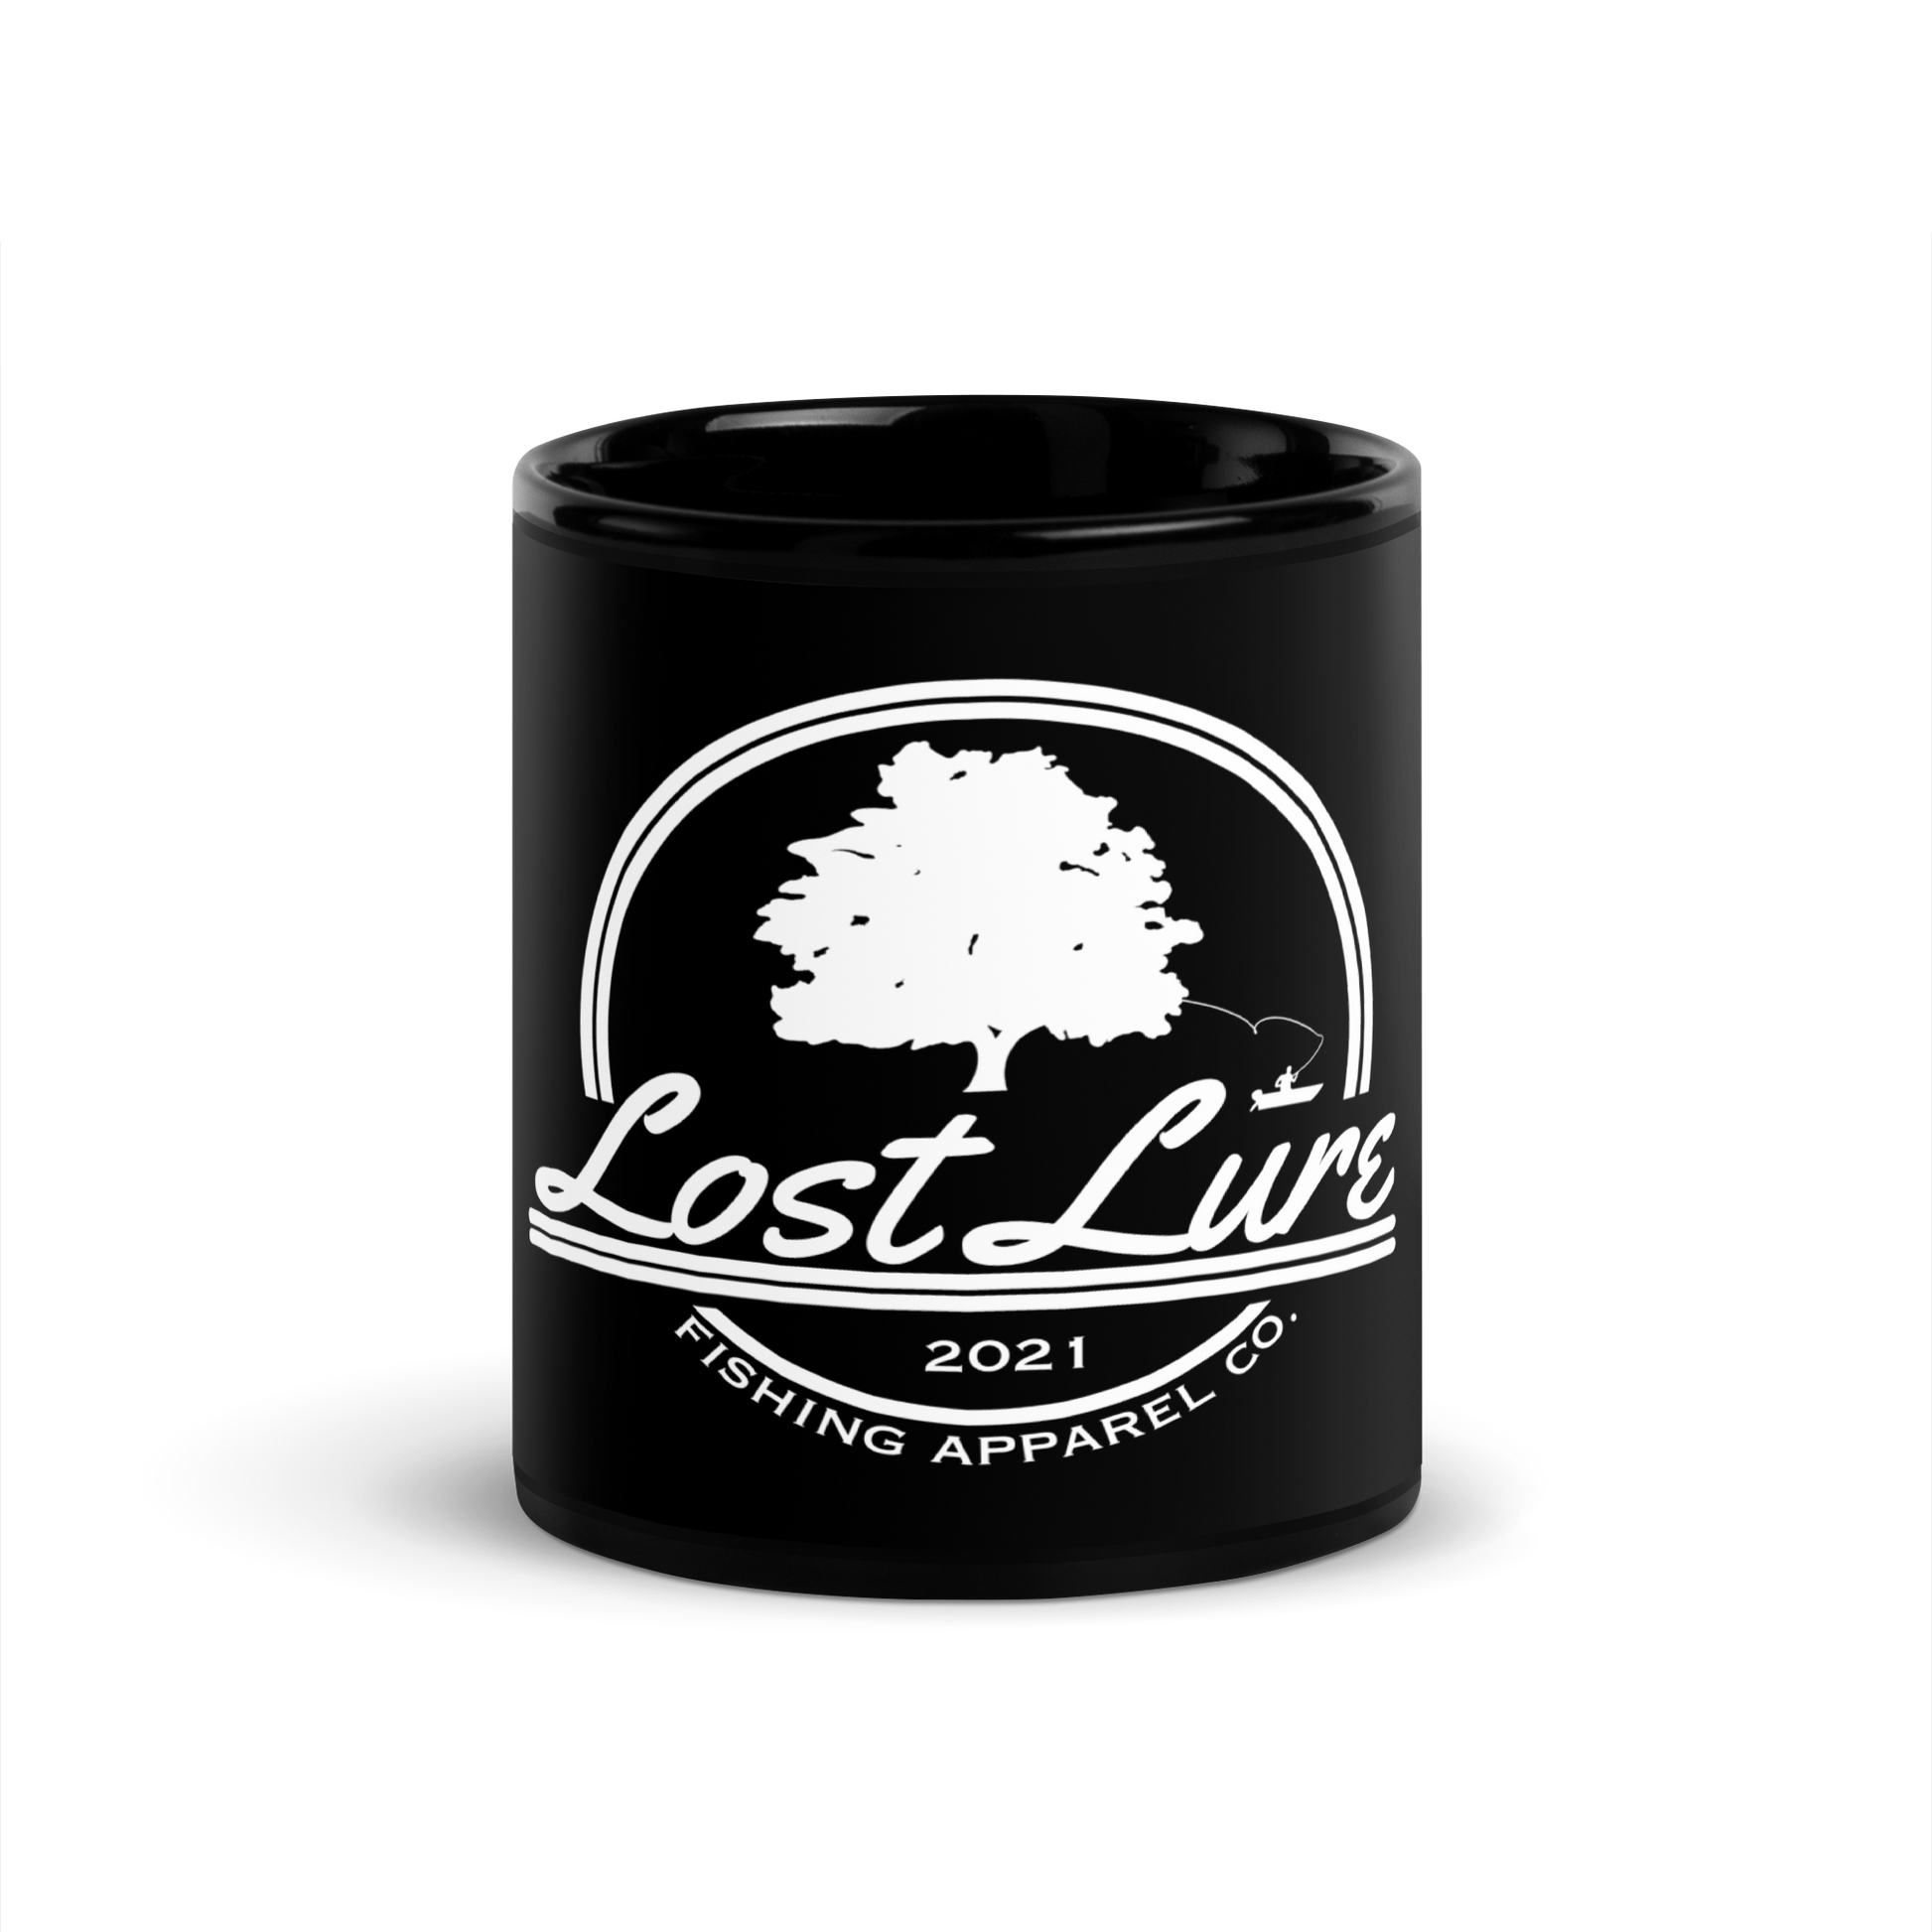 Black fishing coffee mug with white Lost Lure logo on the side. Front view